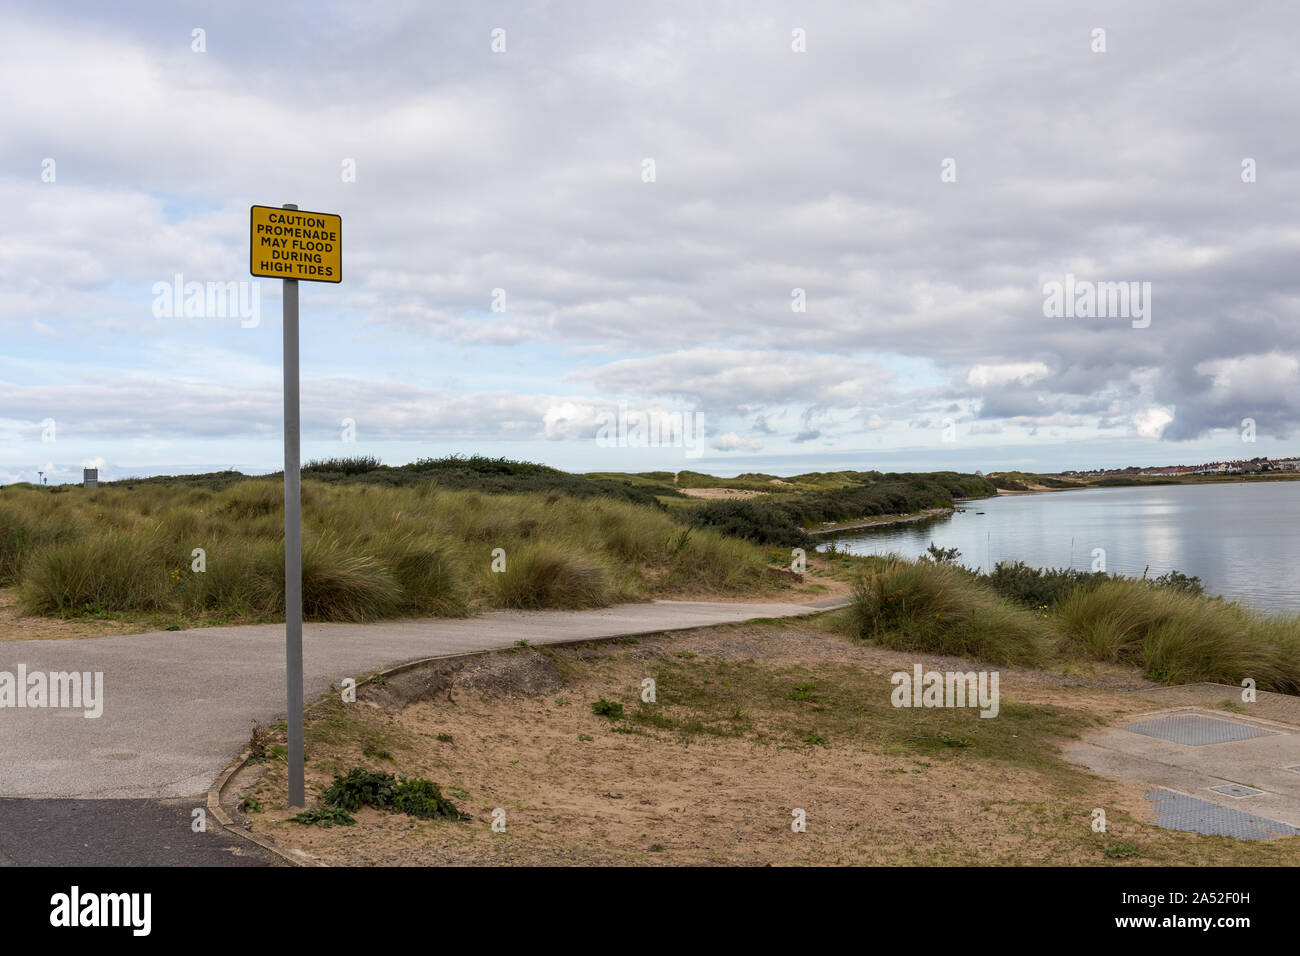 Caution promenade may flood during high tides warning sign at Crosby Lakeside Adventure Centre, Merseyside, United Kingdom Stock Photo